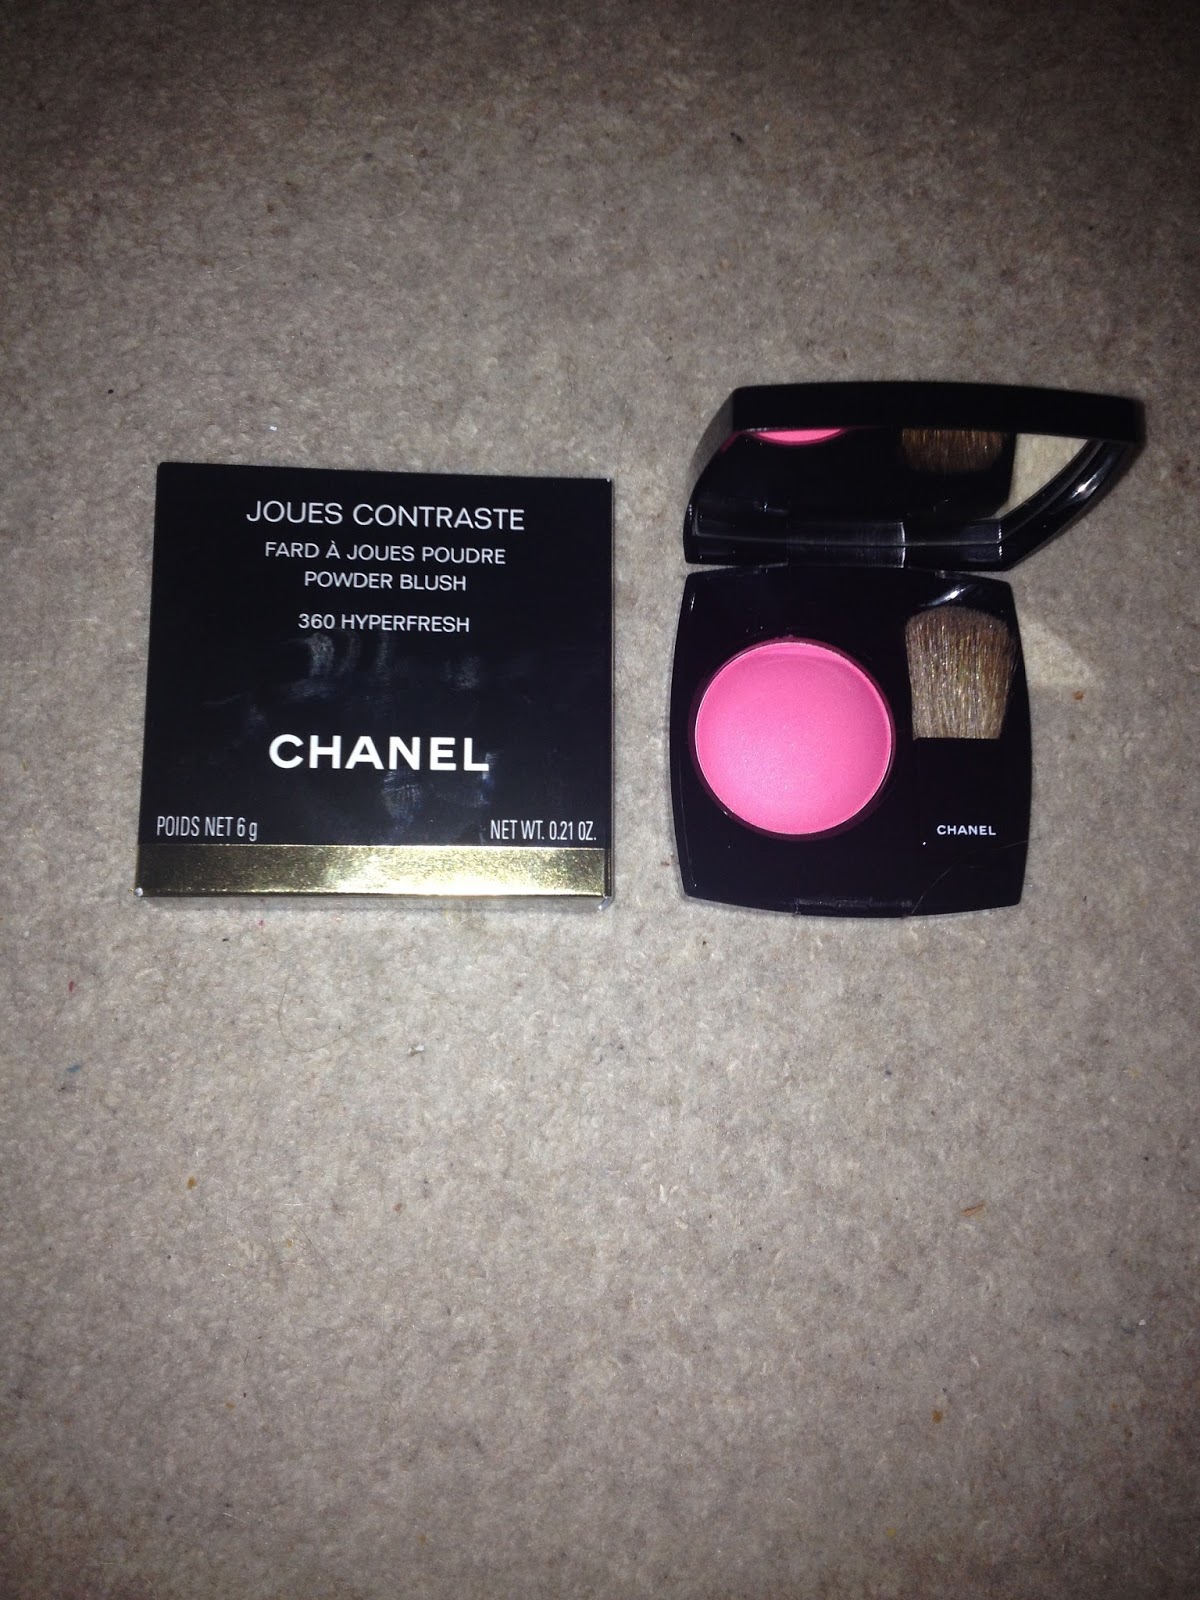 The Makeup Junkie's Diary: Chanel Joues Contraste Powder Blush - Hyperfresh